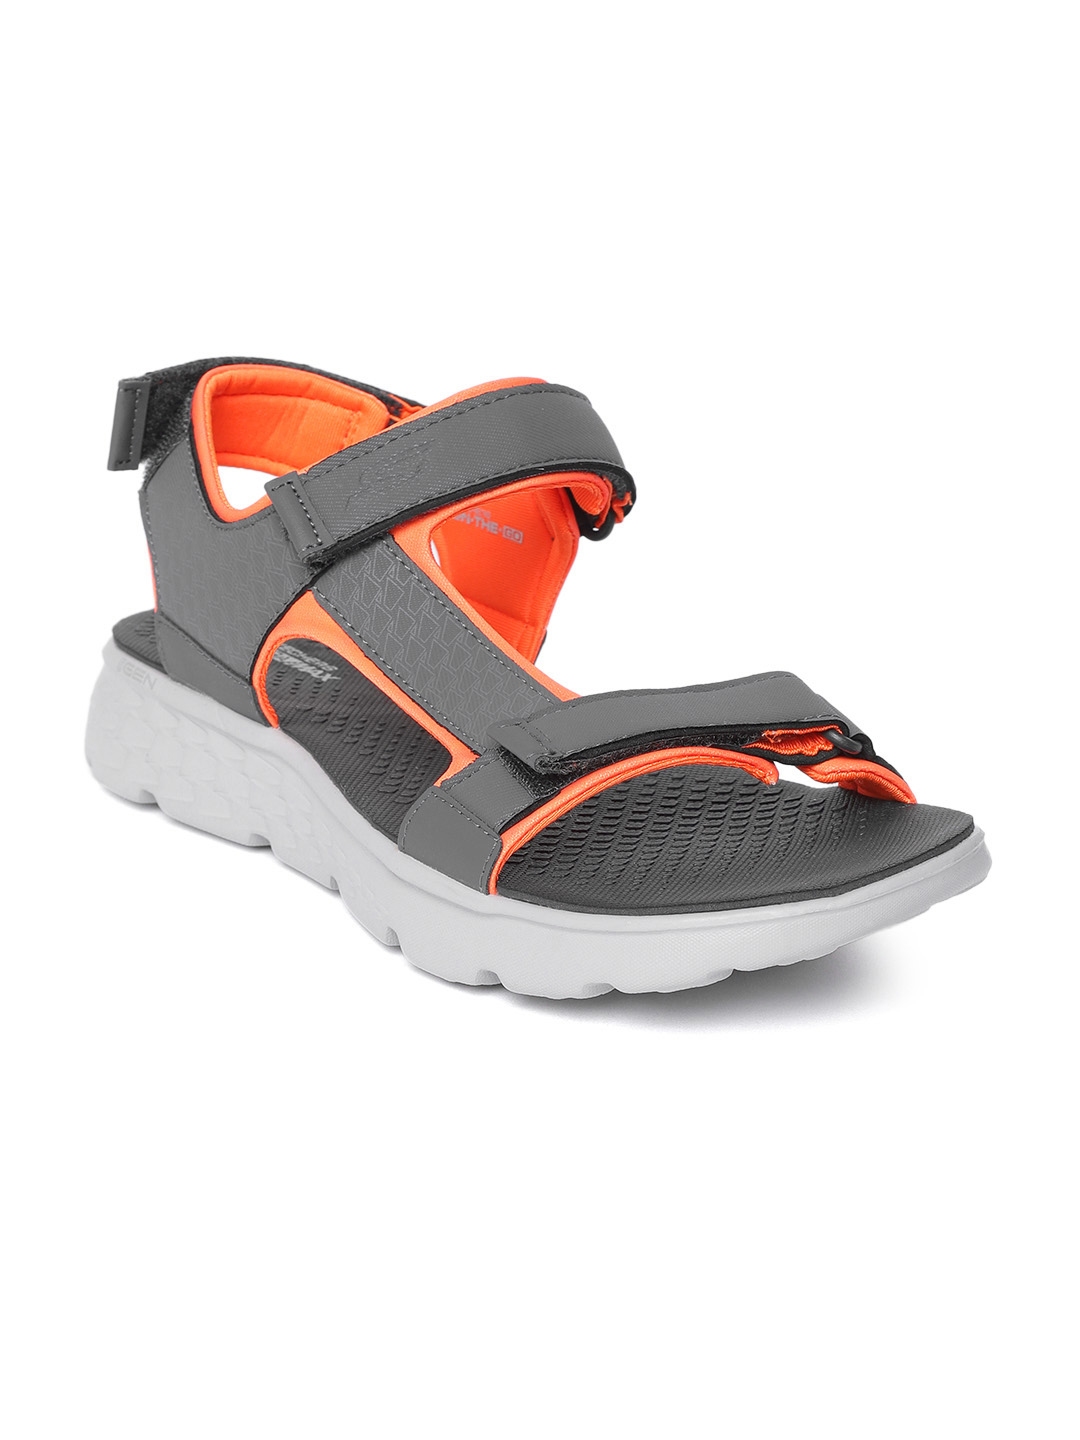 skechers on the go jazzy sandals